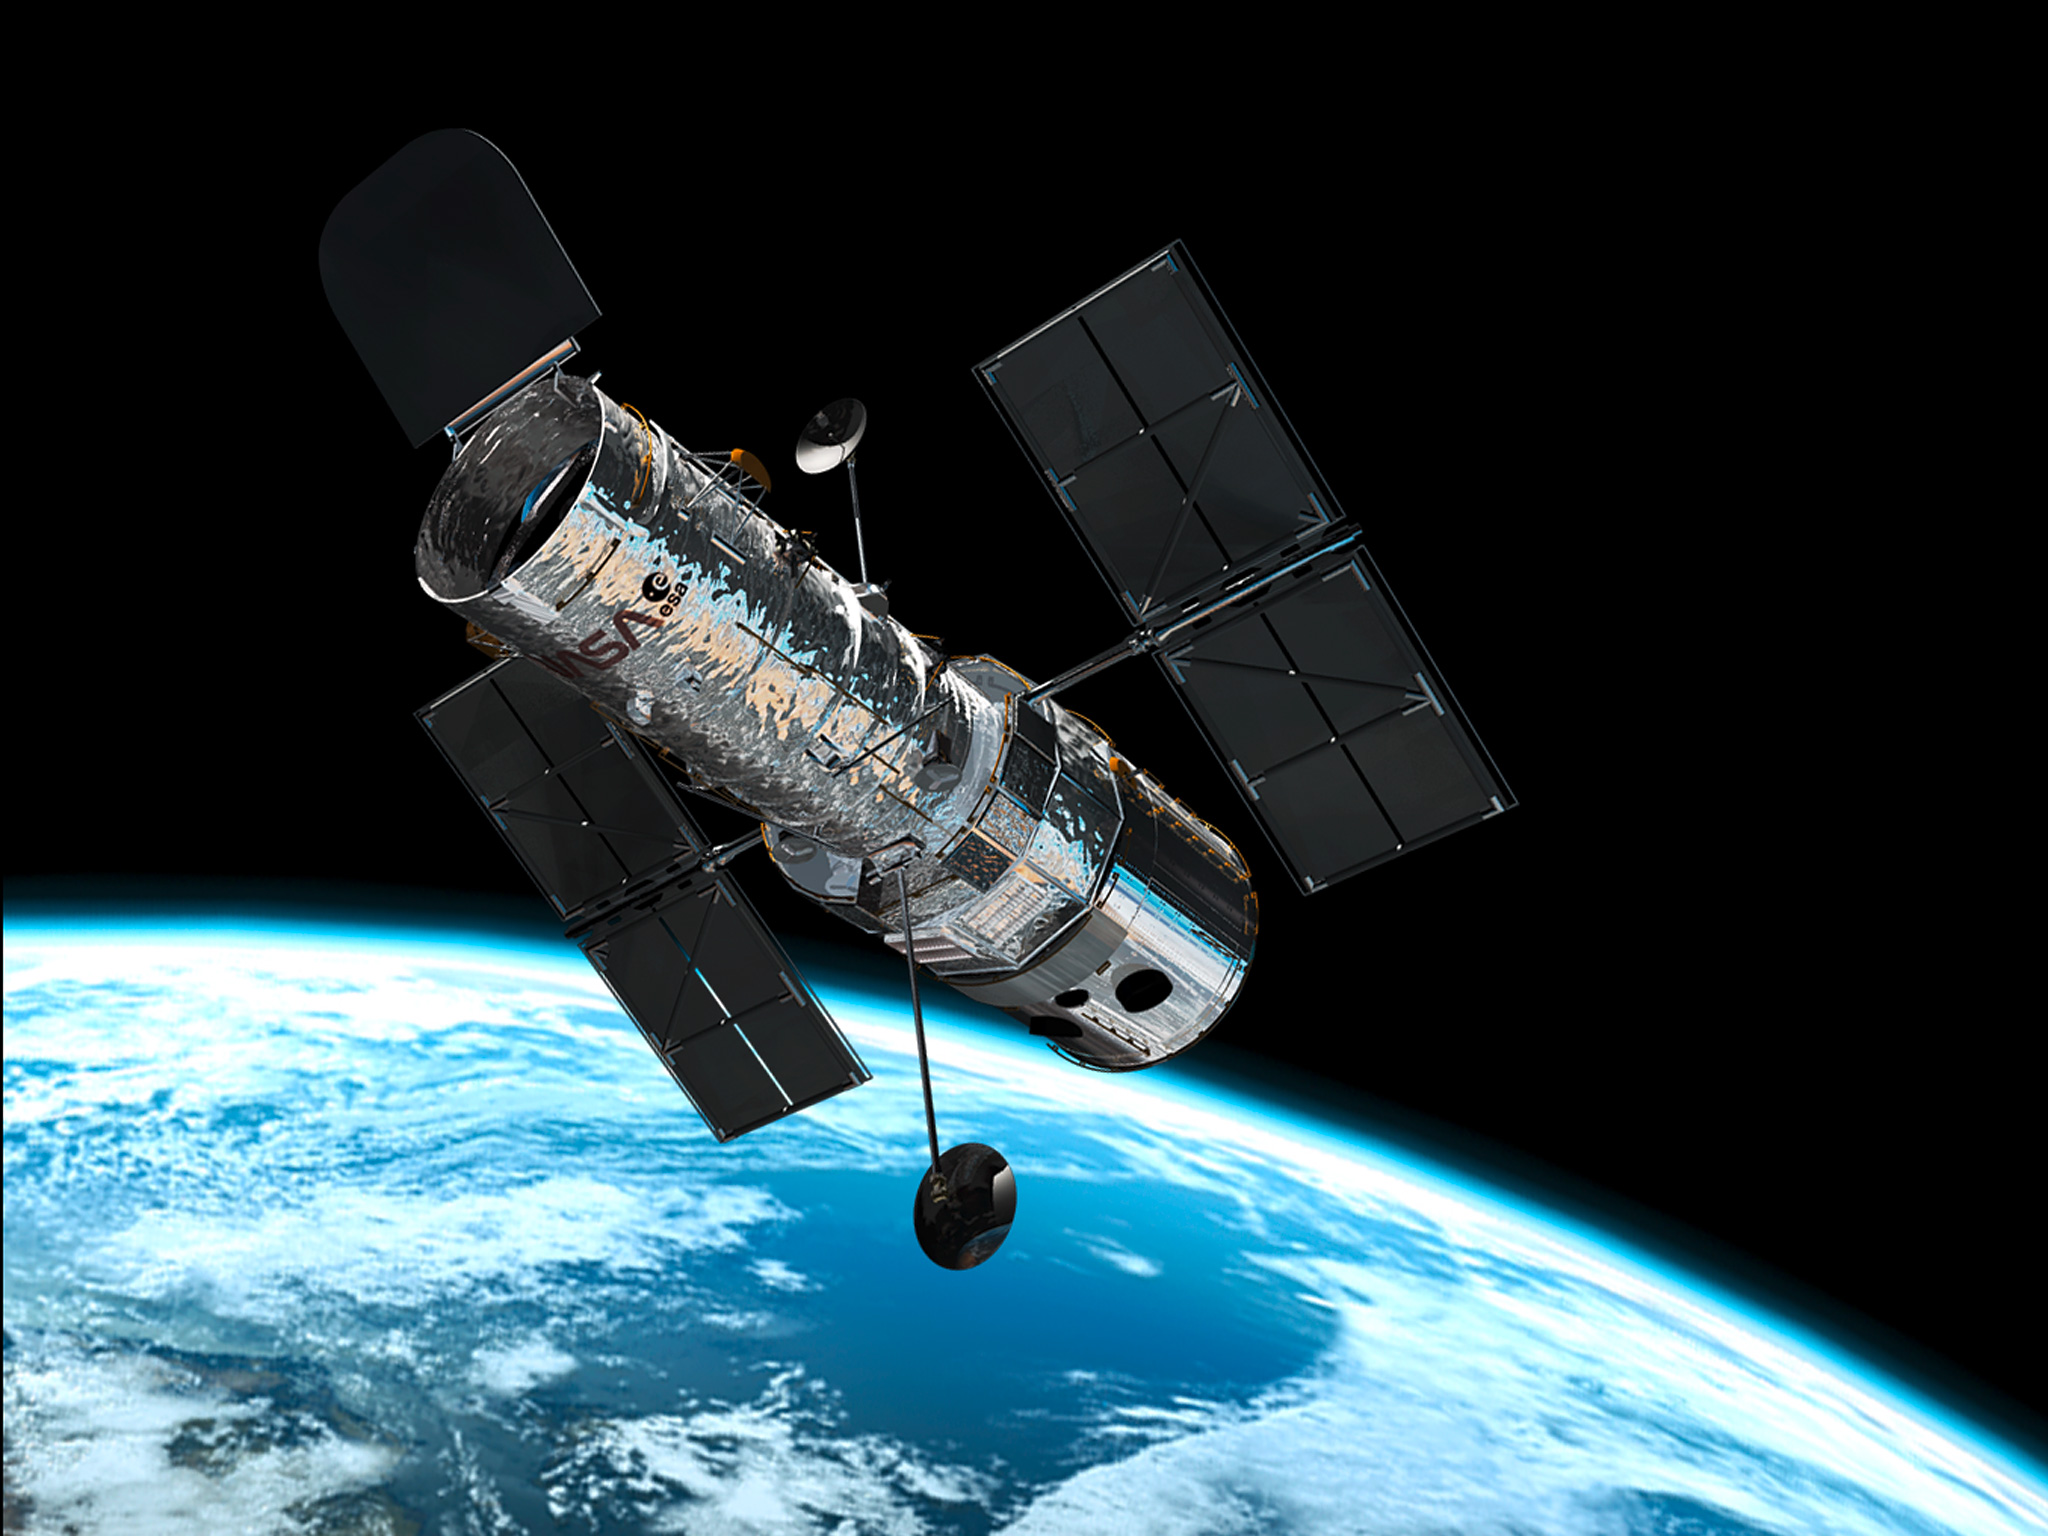 “Gathering Light: 25 Years of Discovery from the Hubble Space Telescope” in 3-D at Marston Exploration Theater